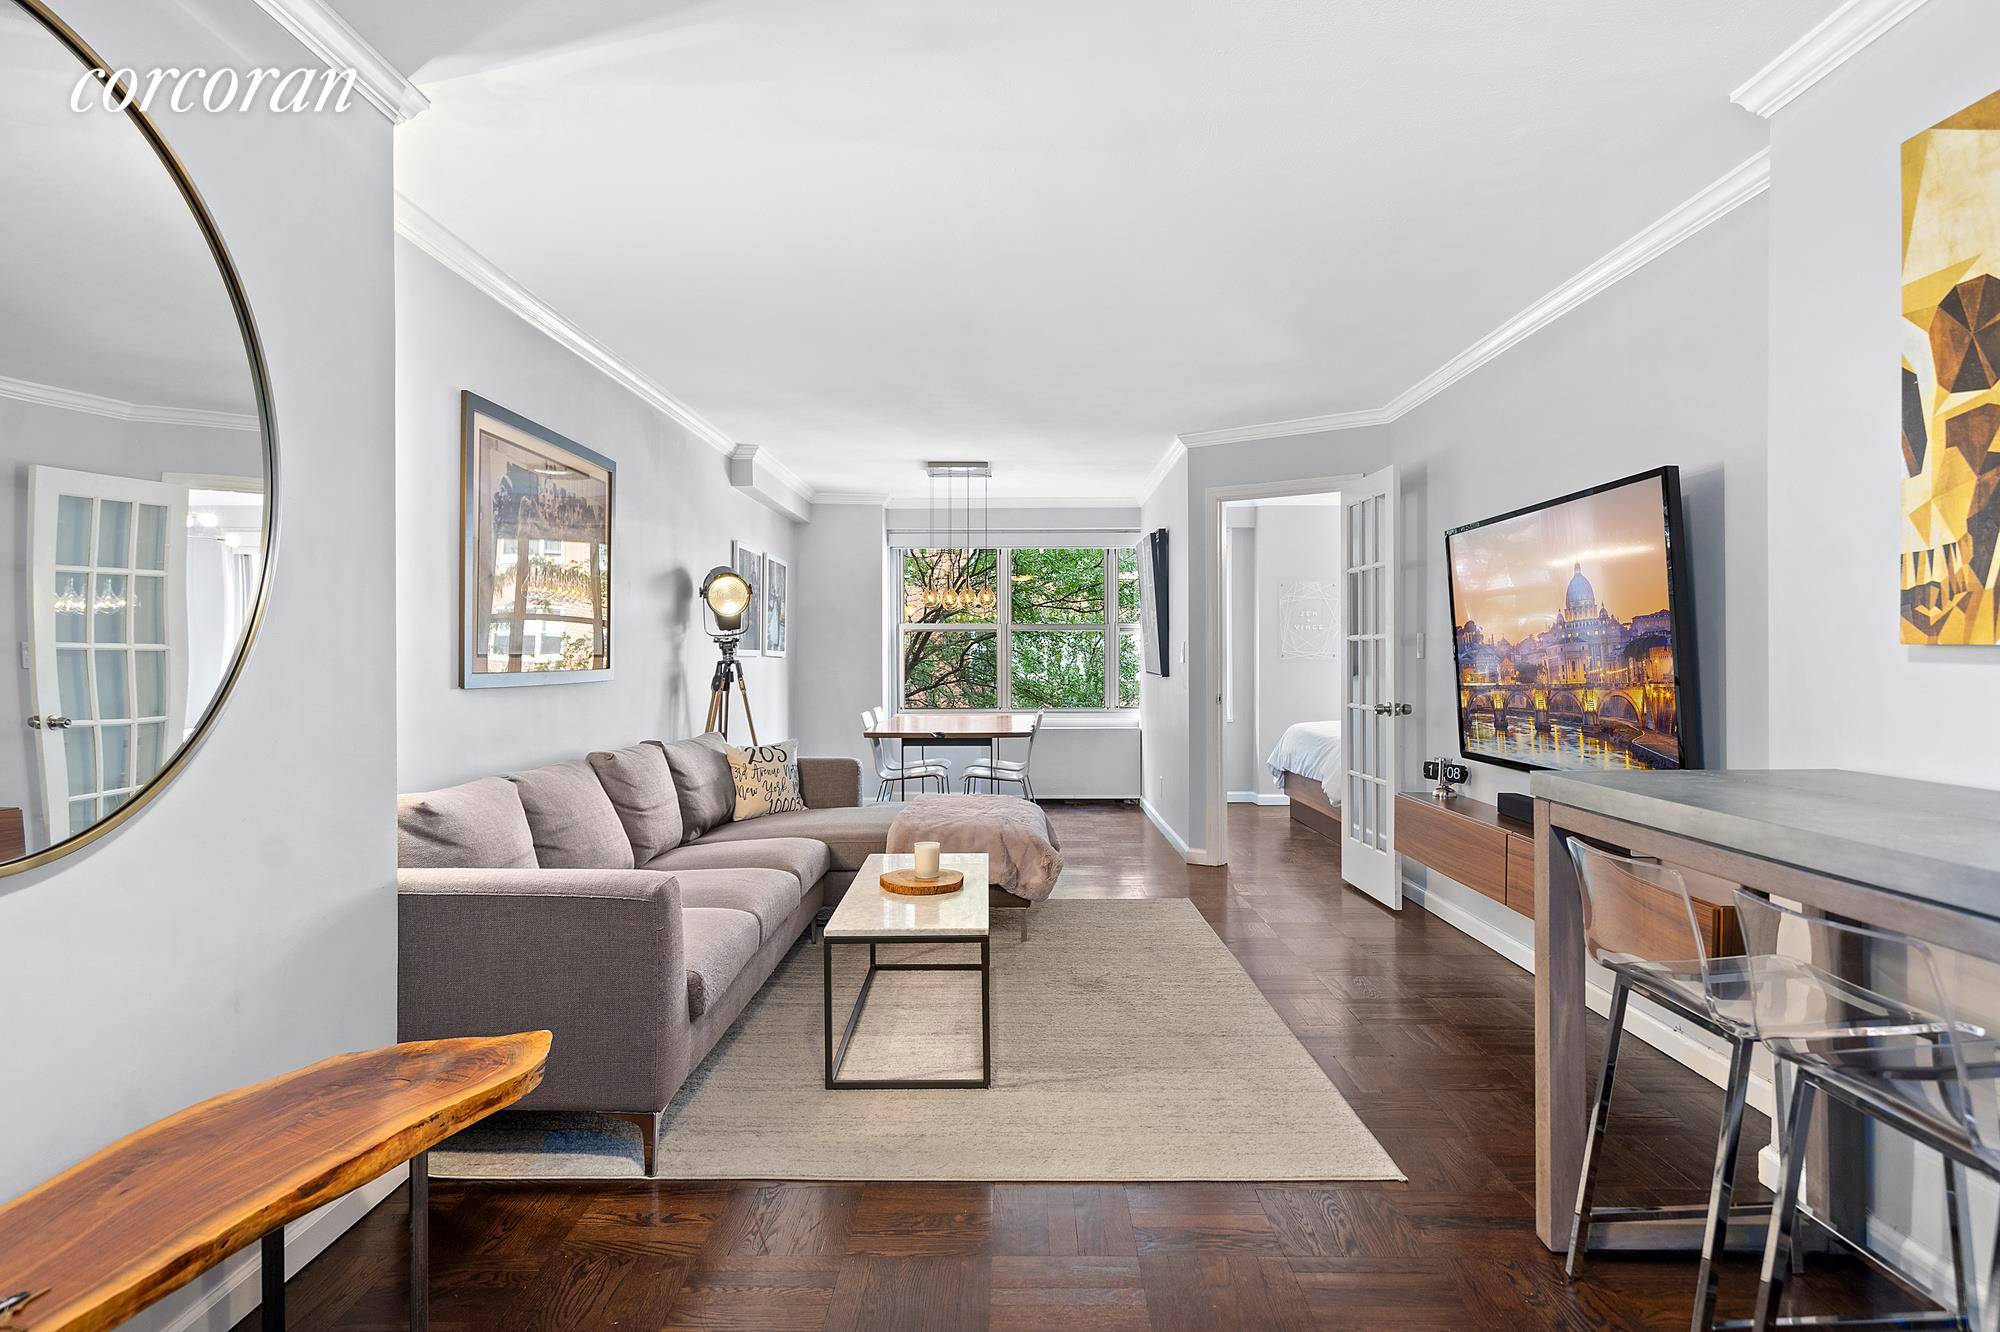 Enjoy large living spaces and storage in this one bedroom one bath home in the heart of Gramercy, one of New York City's best neighborhoods.